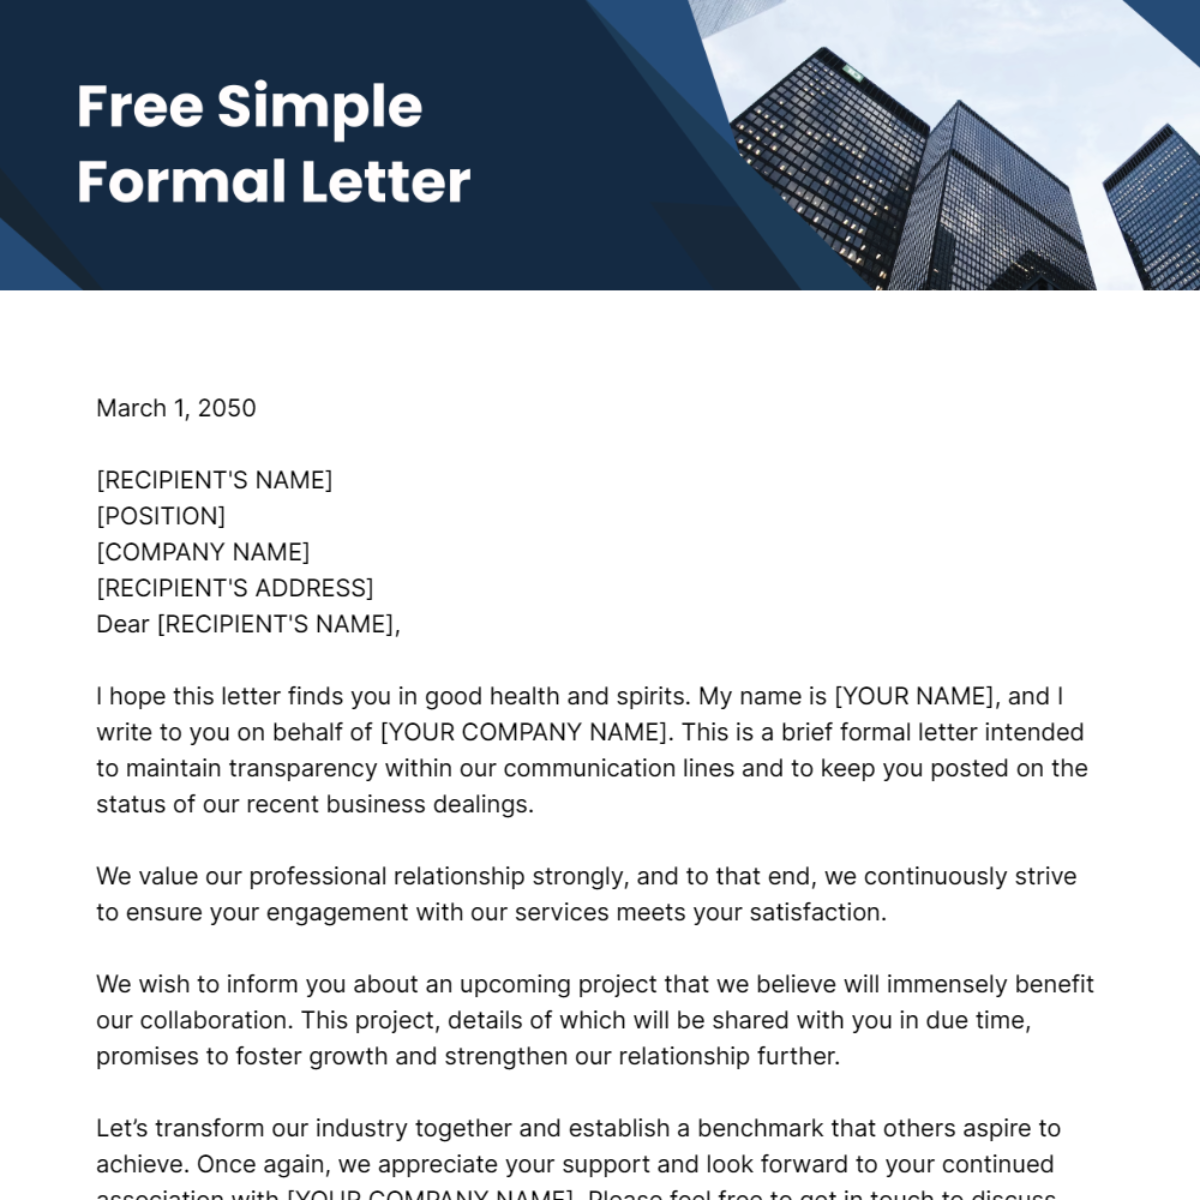 Free Simple Formal Letter Template